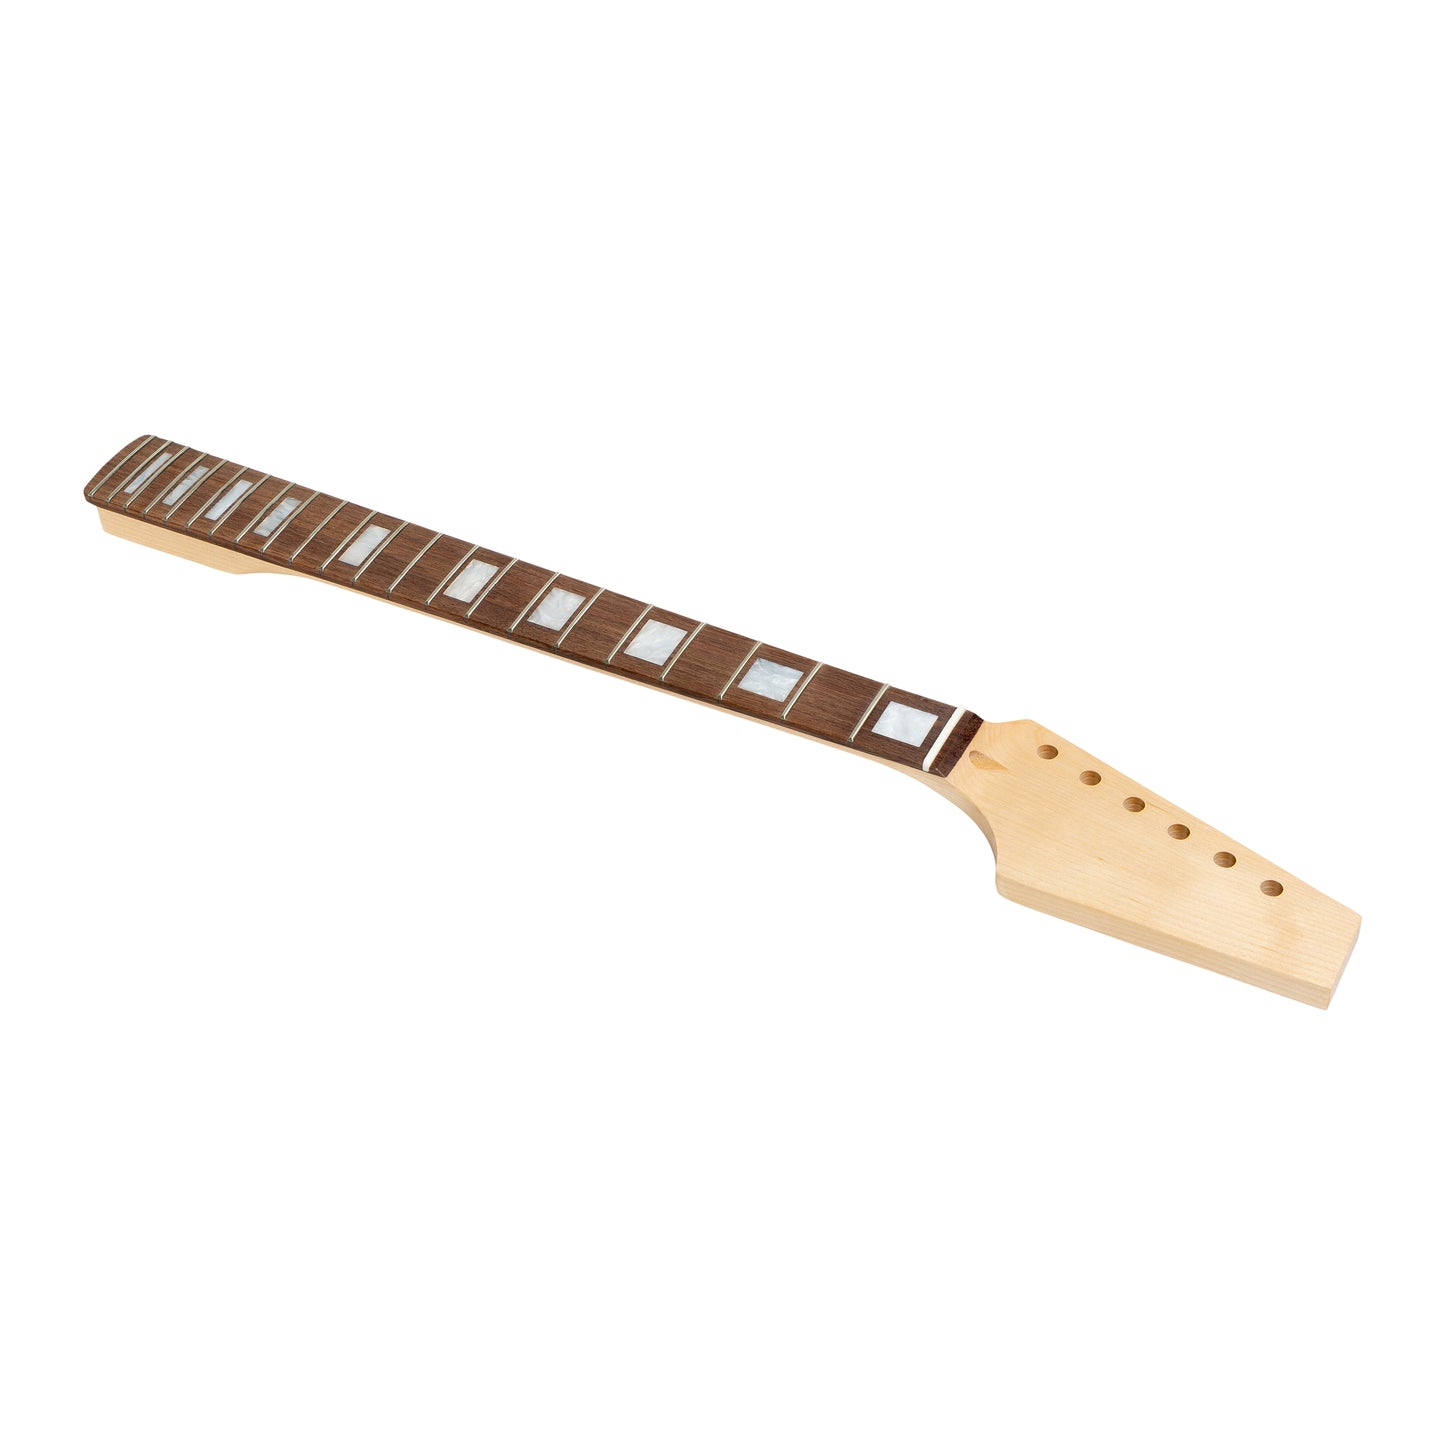 AE Guitars® S-Style Guitar Neck 22 Frets Rosewood Block Inlay